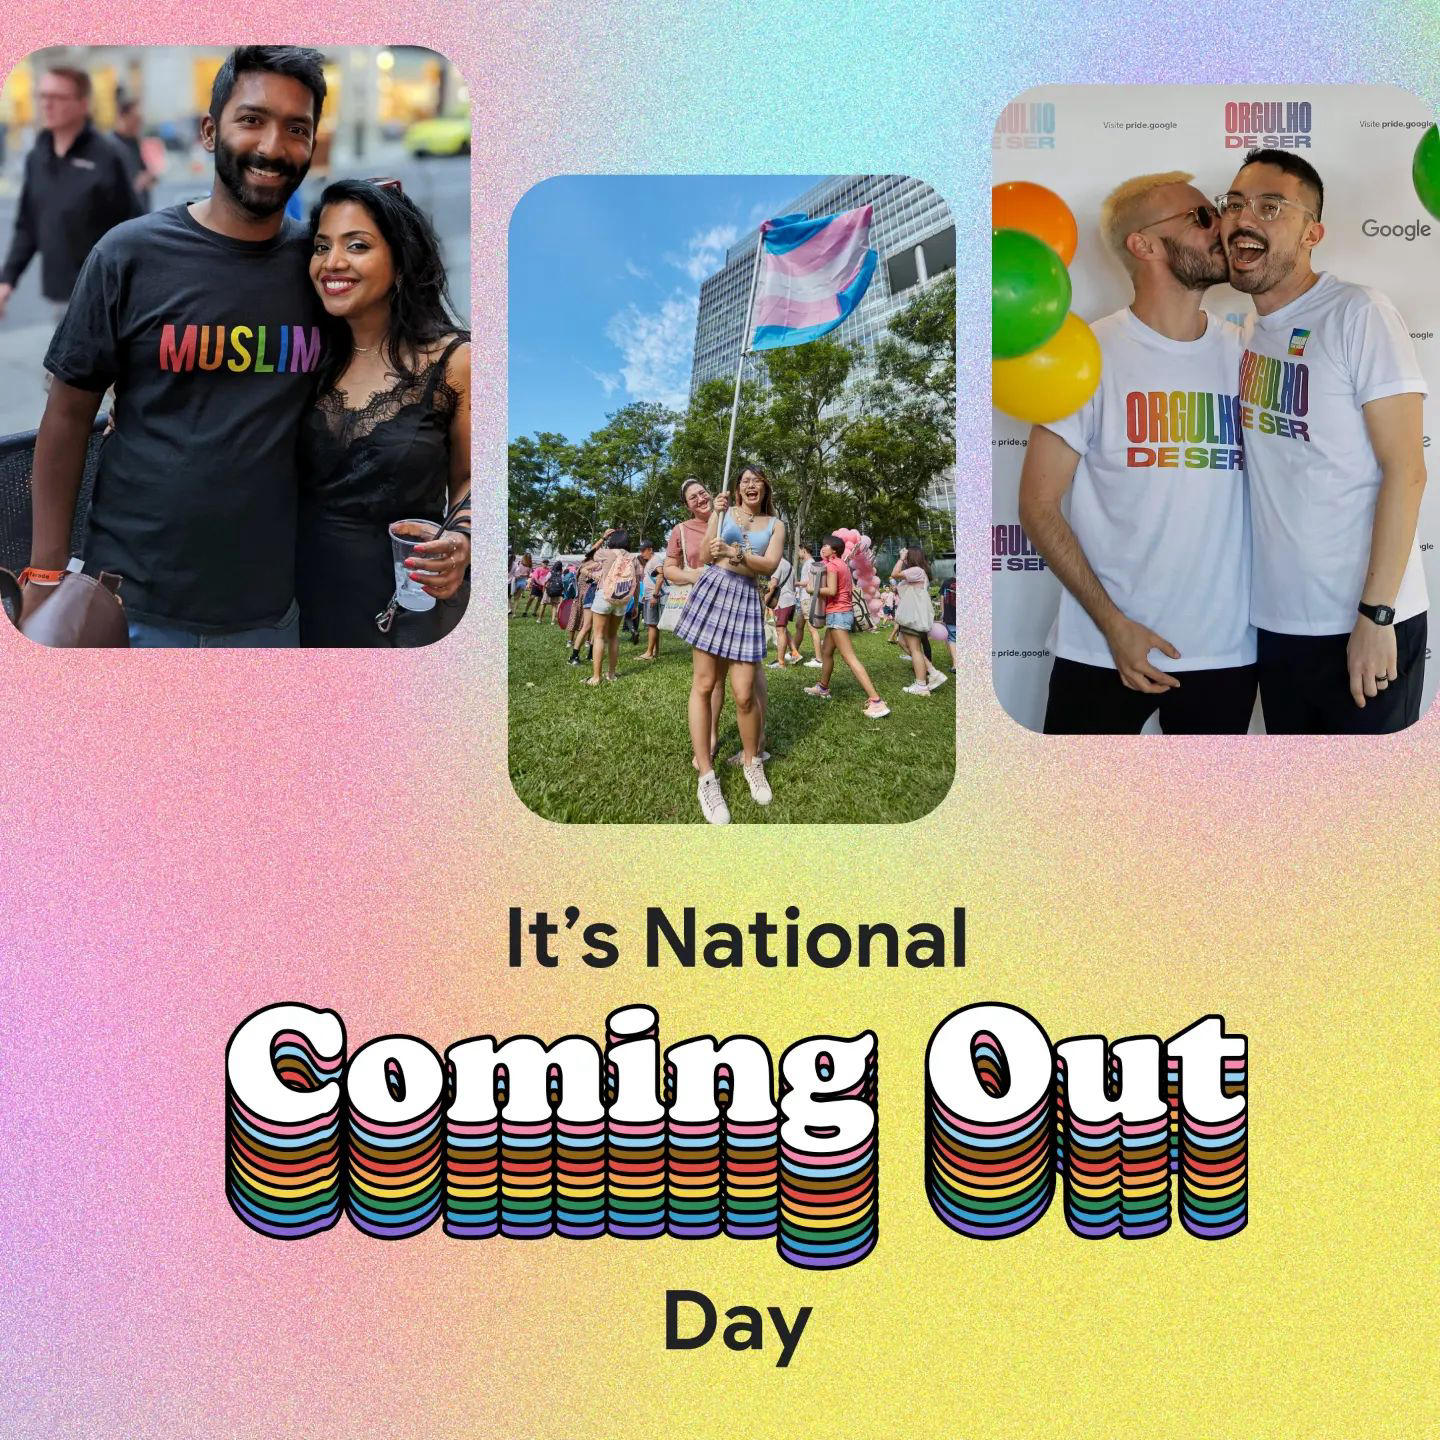 image  1 Google - Today on #NationalComingOutDay, we continue our support of the #LGBTQ+ community by celebra